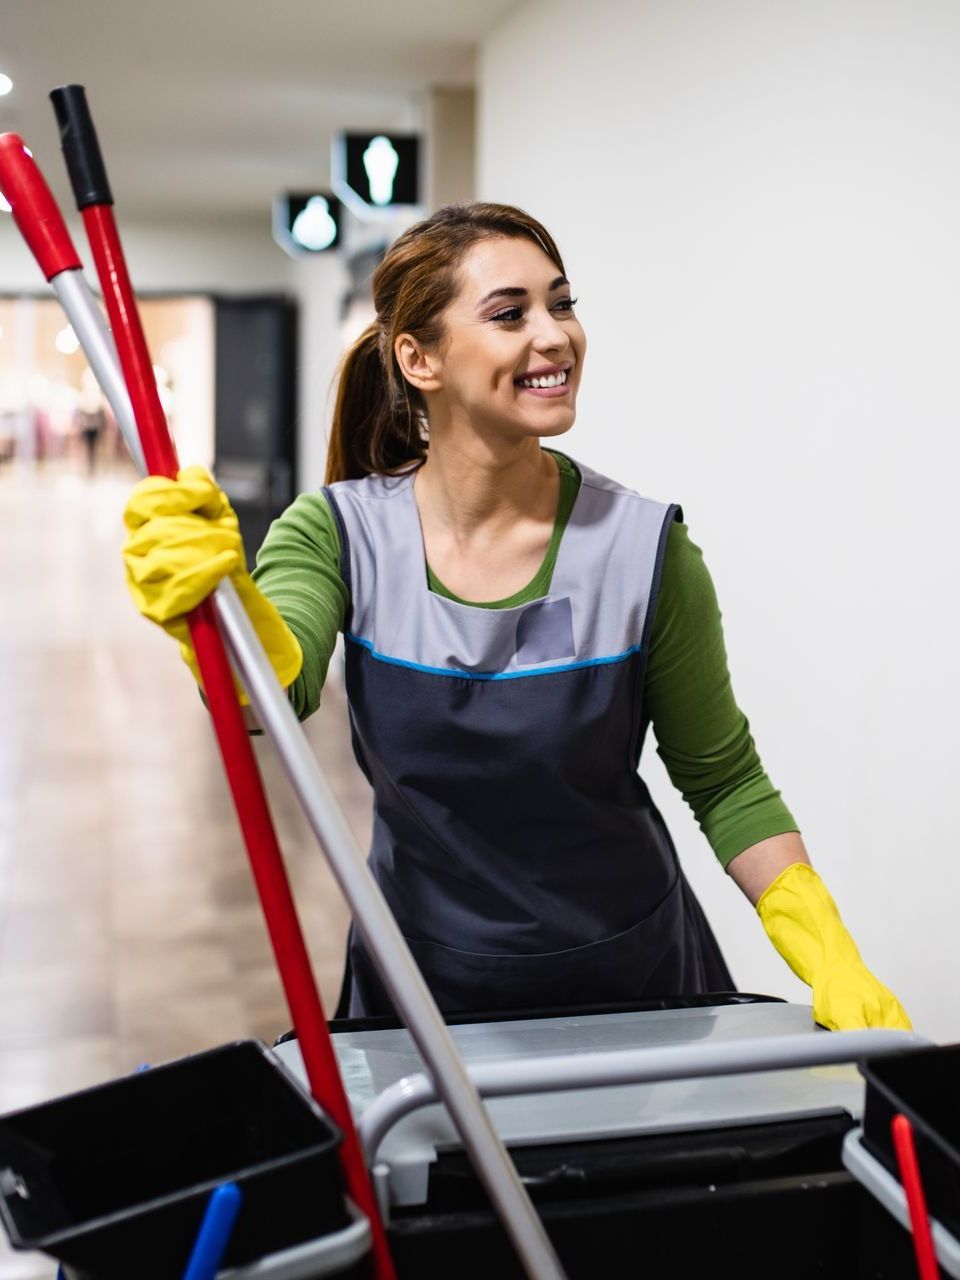 Janitorial Cleaning Company in Odessa, TX